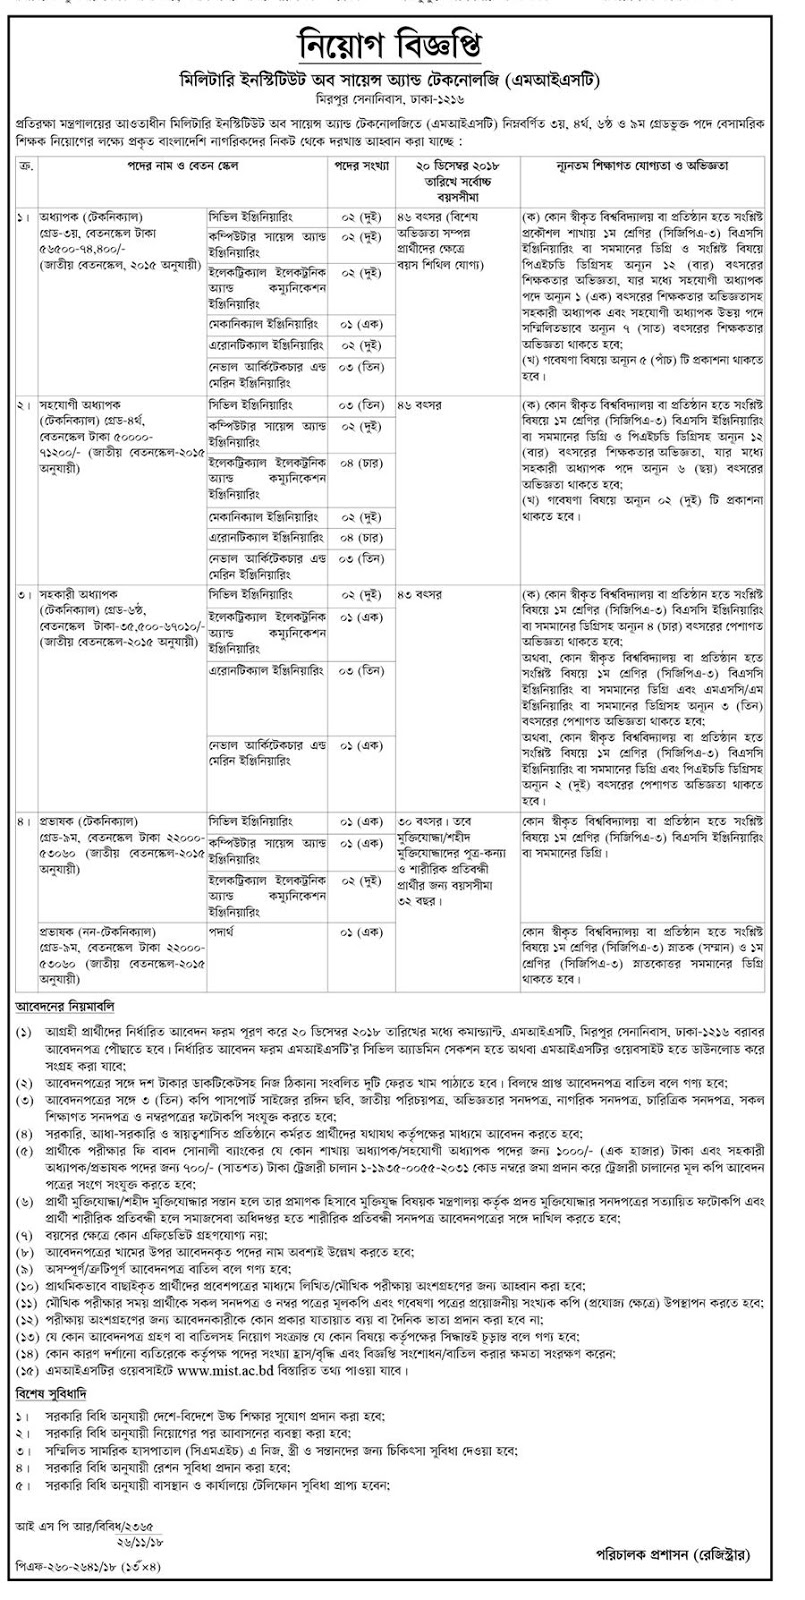 Military Institute of Science & Technology (MIST) Job Circular 2018 